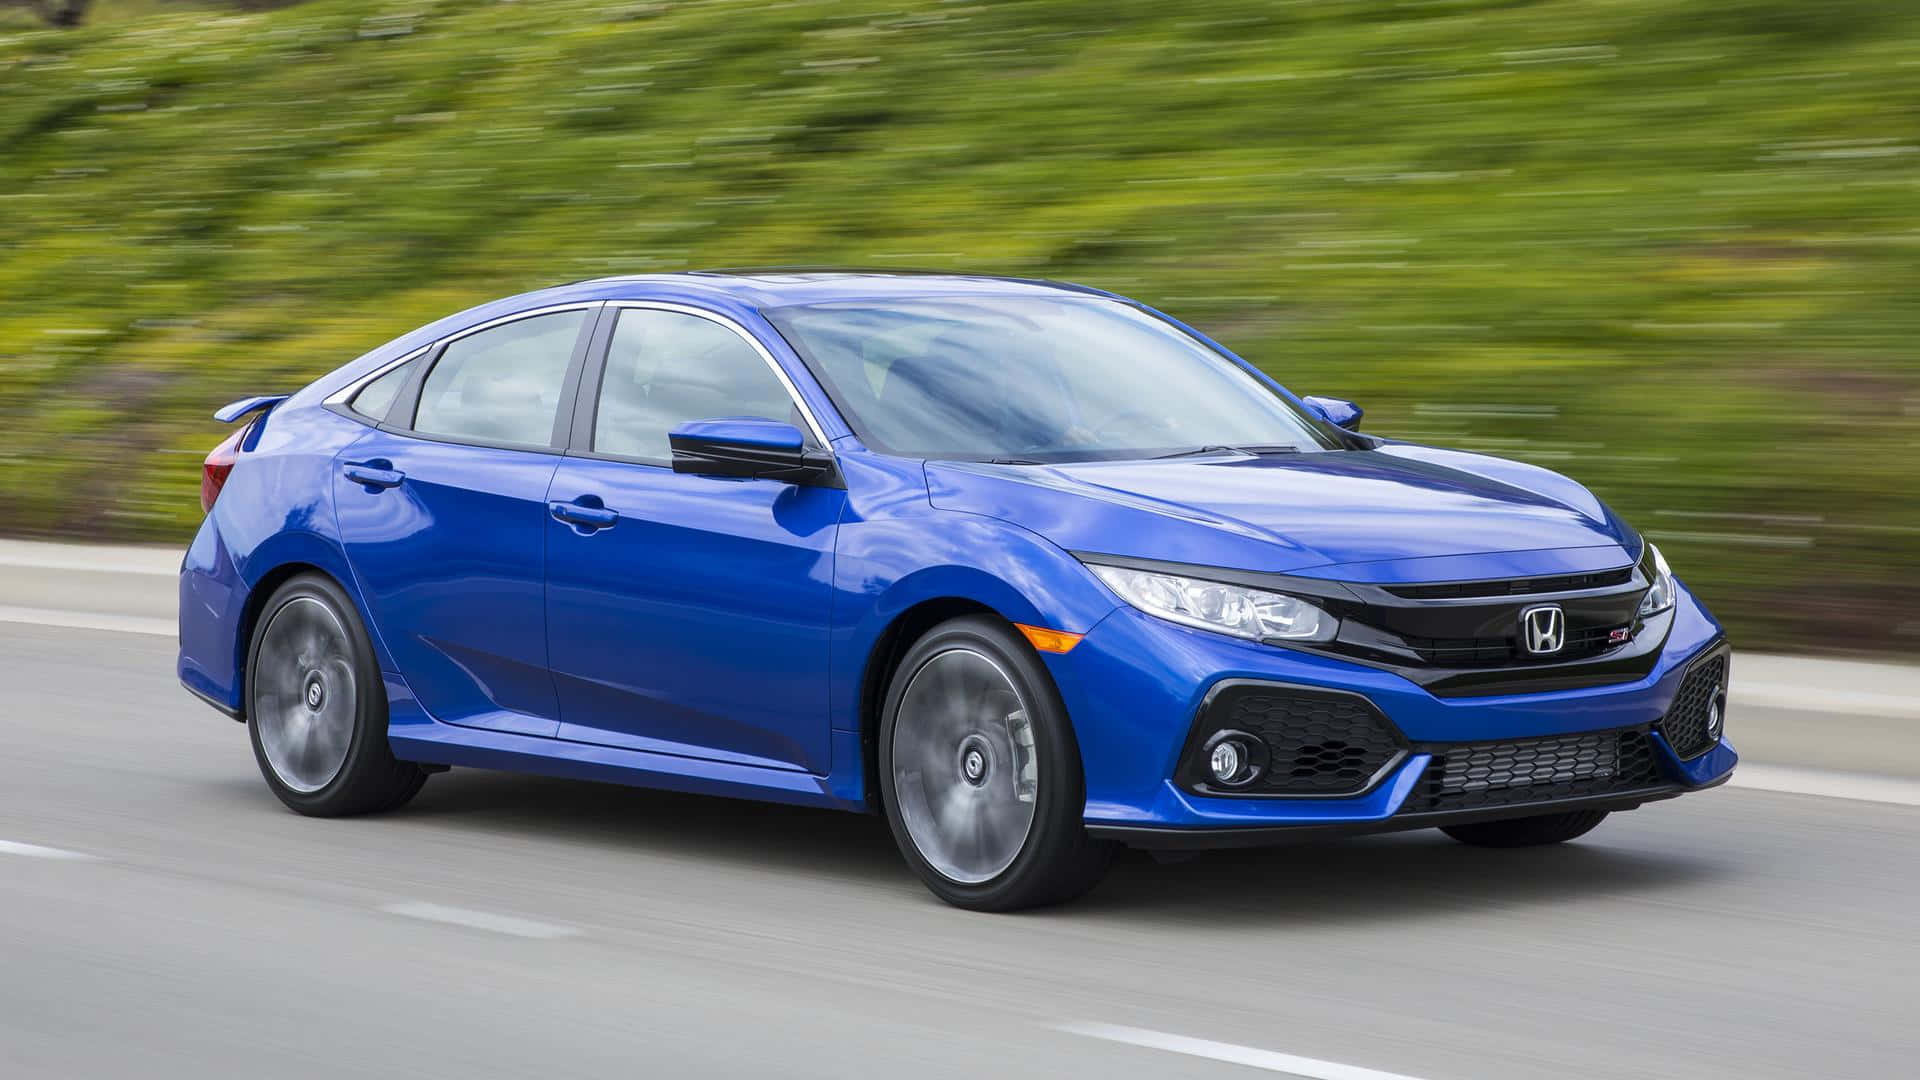 Make a statement in your Honda Civic.